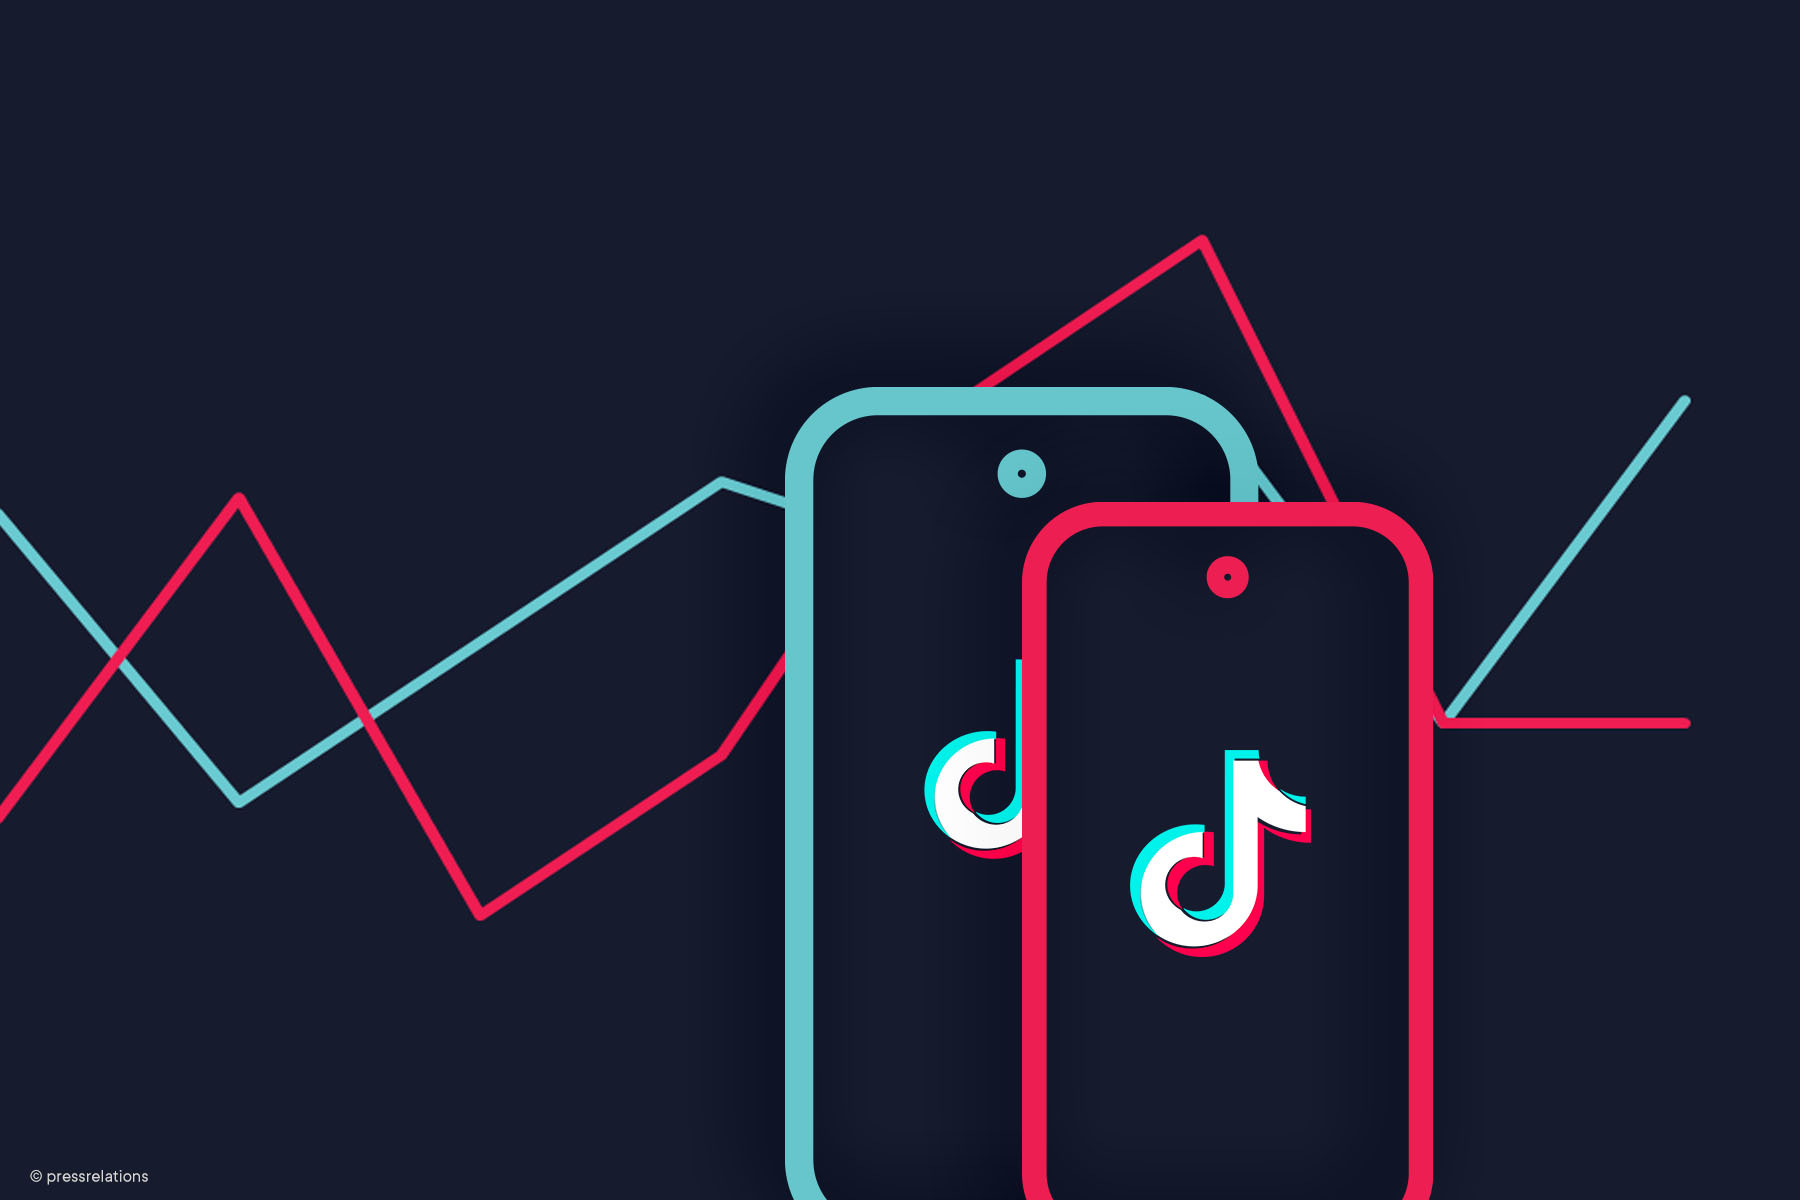 How to Run a Successful Marketing Campaign on TikTok?